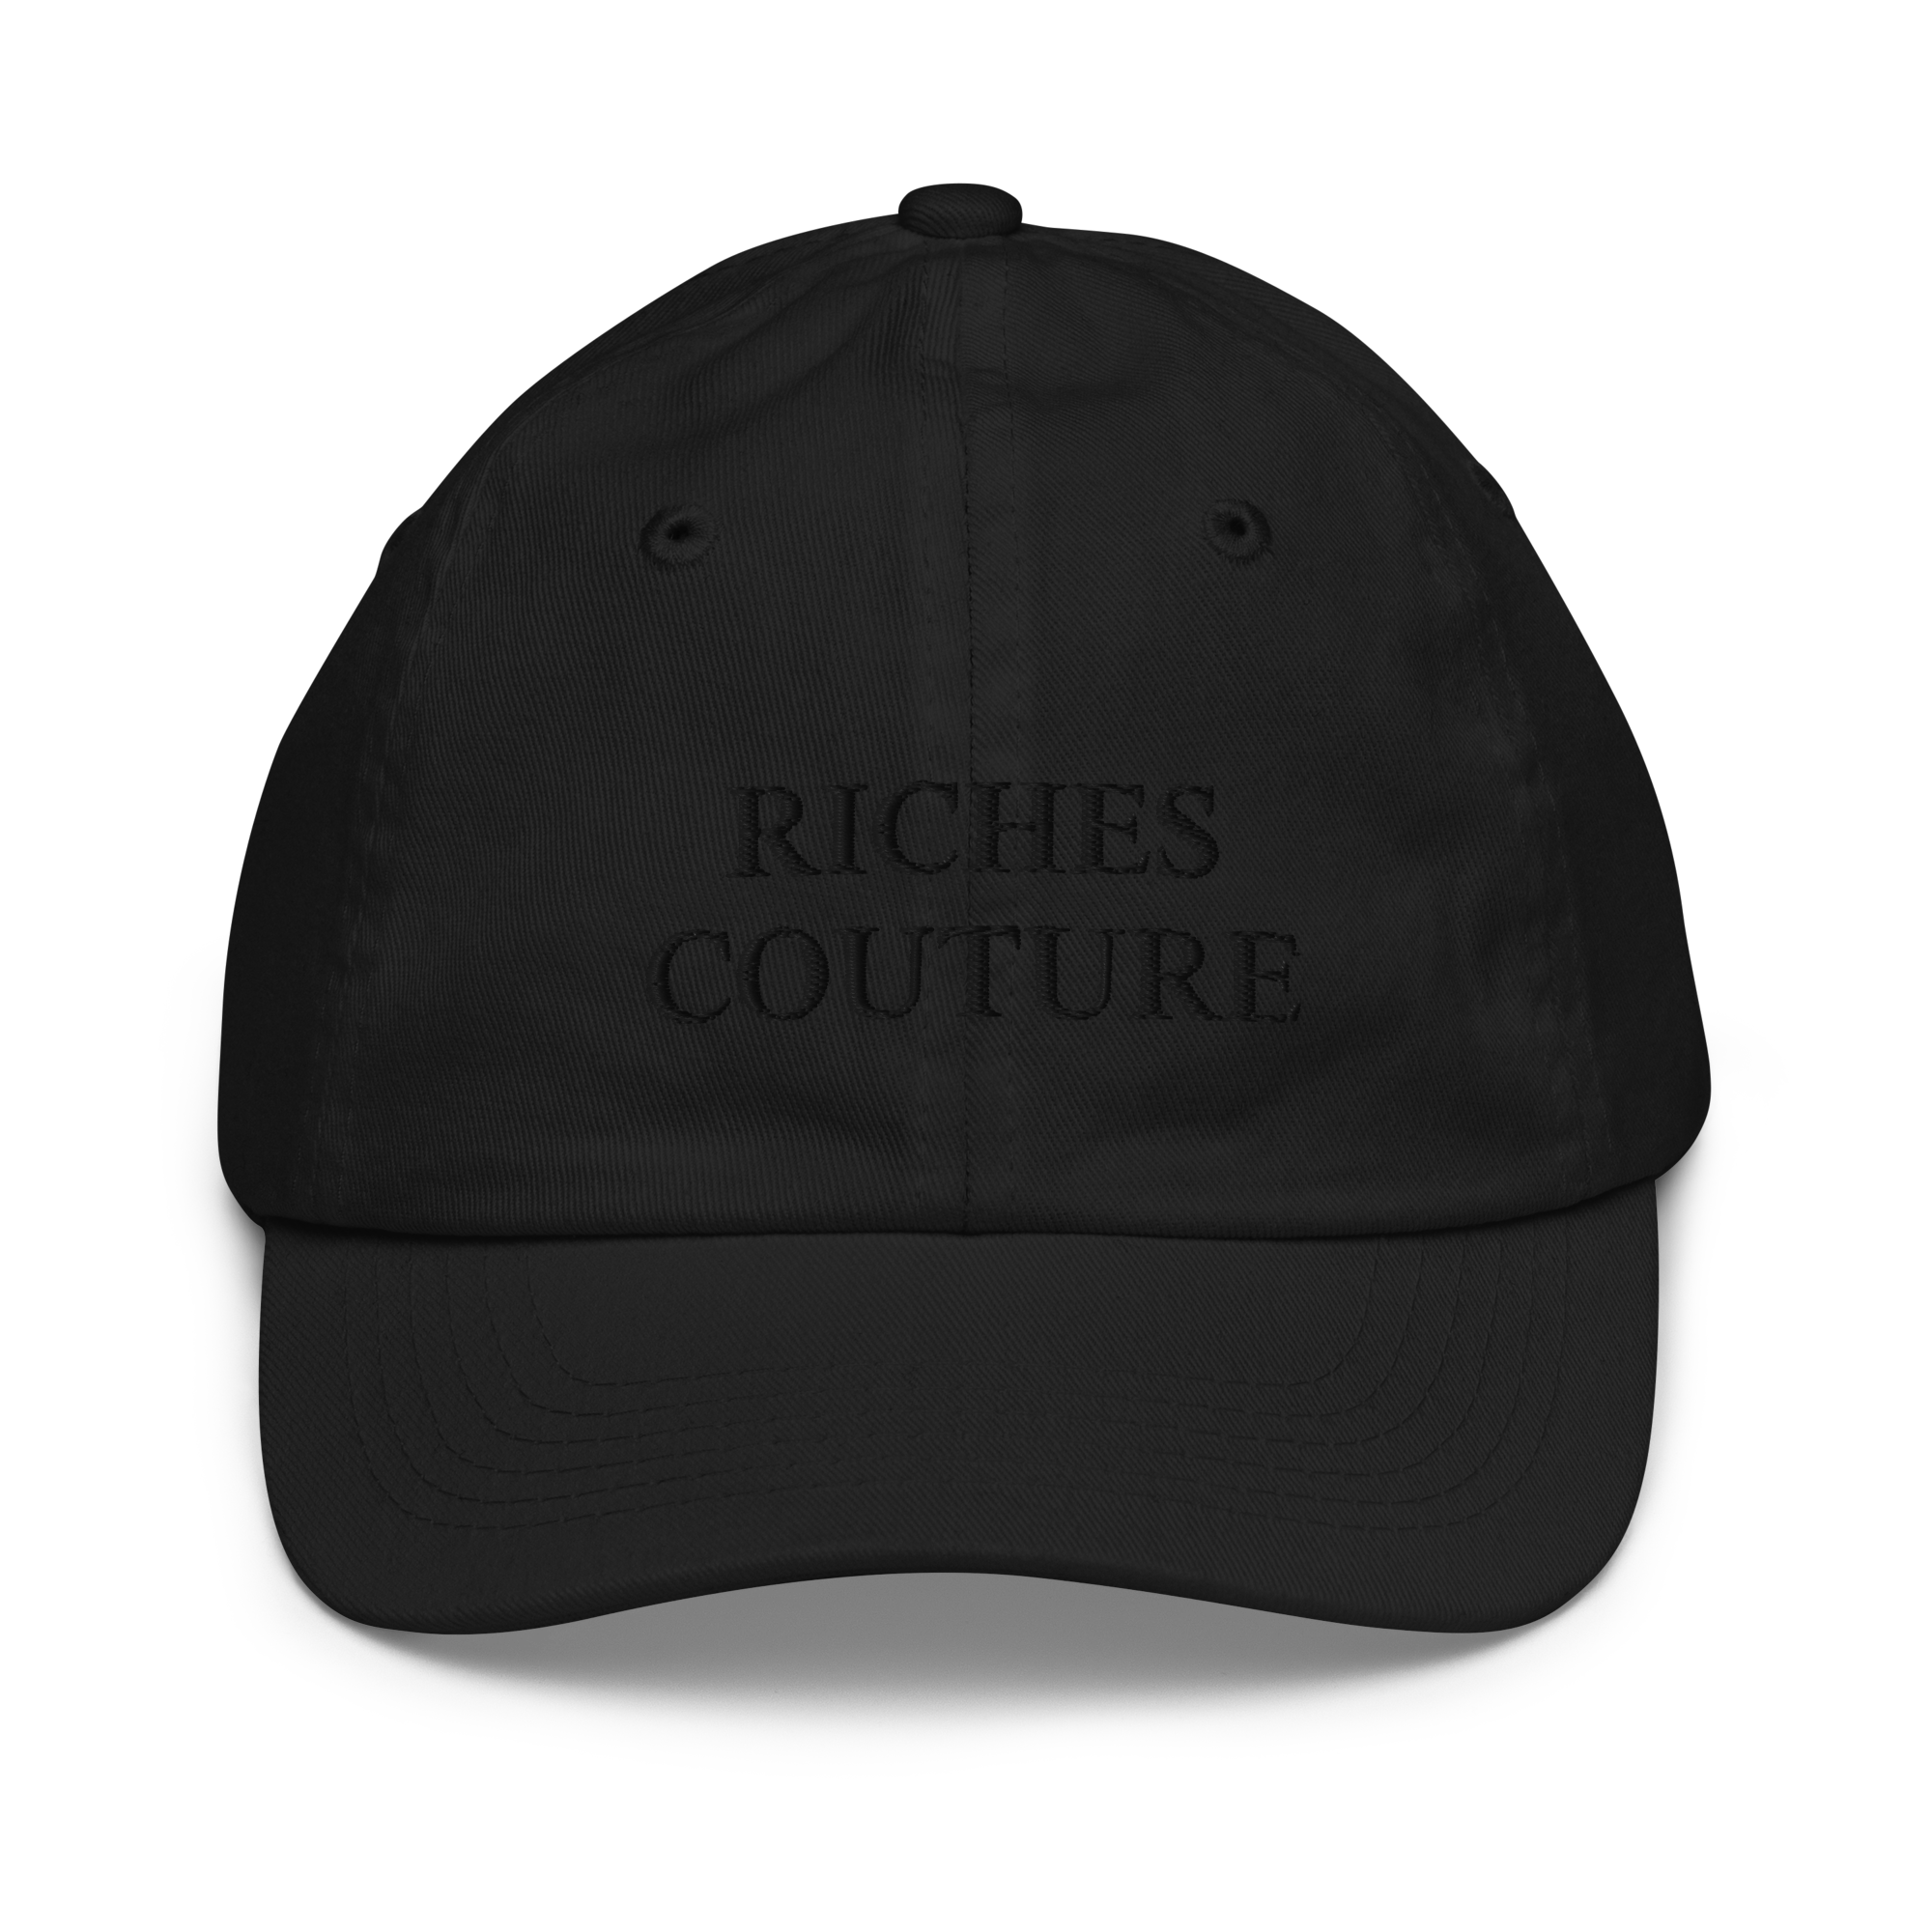 Noir Couture Youth Baseball Cap